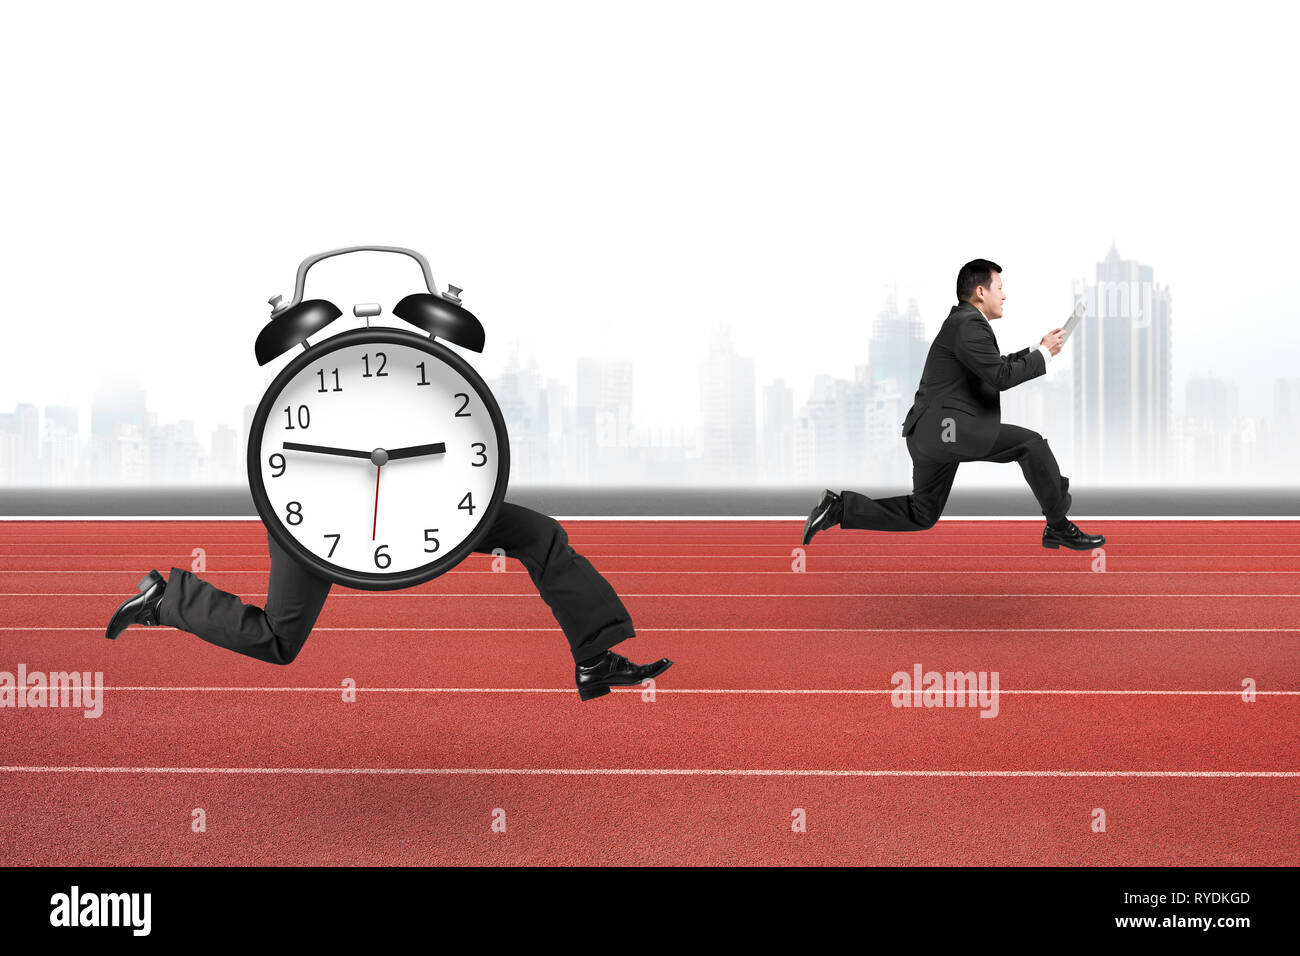 Alarm clock of running legs running after man holding tablet, on red running track with city skyline background. Stock Photo